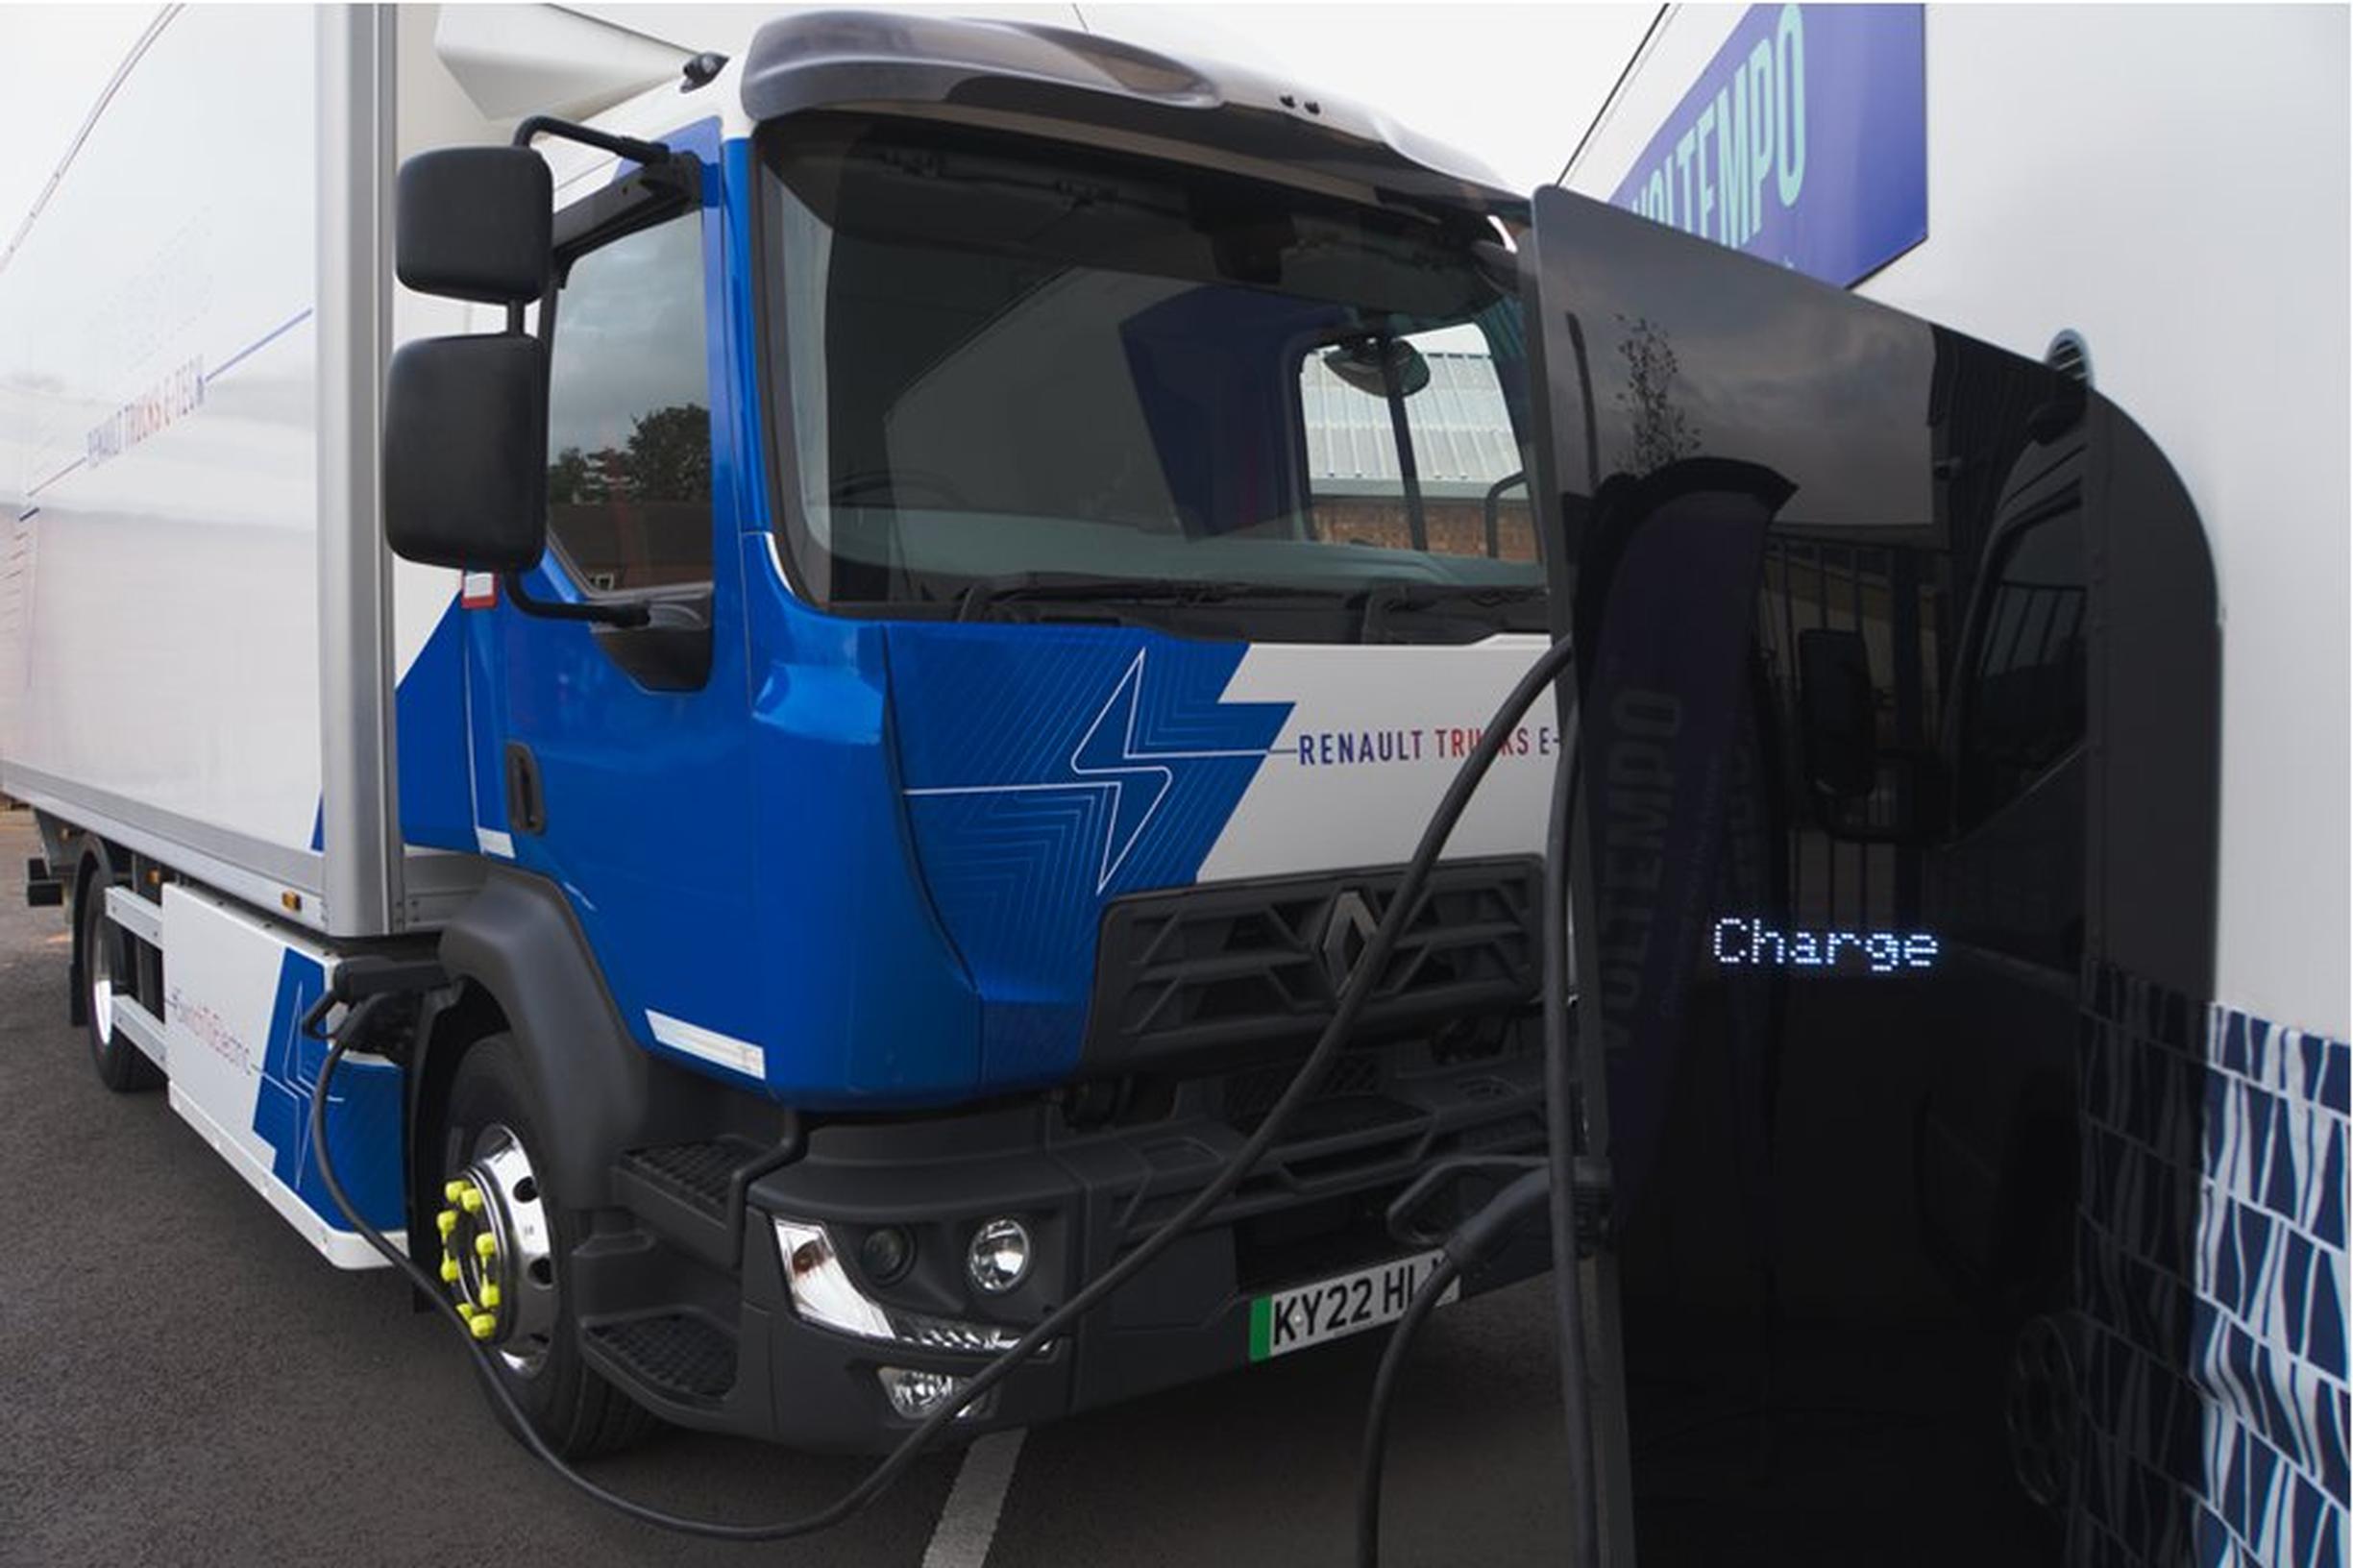 The government investment from zero-emission HGV and infrastructure demonstrator programme will deliver around 57 refuelling and electric charging sites